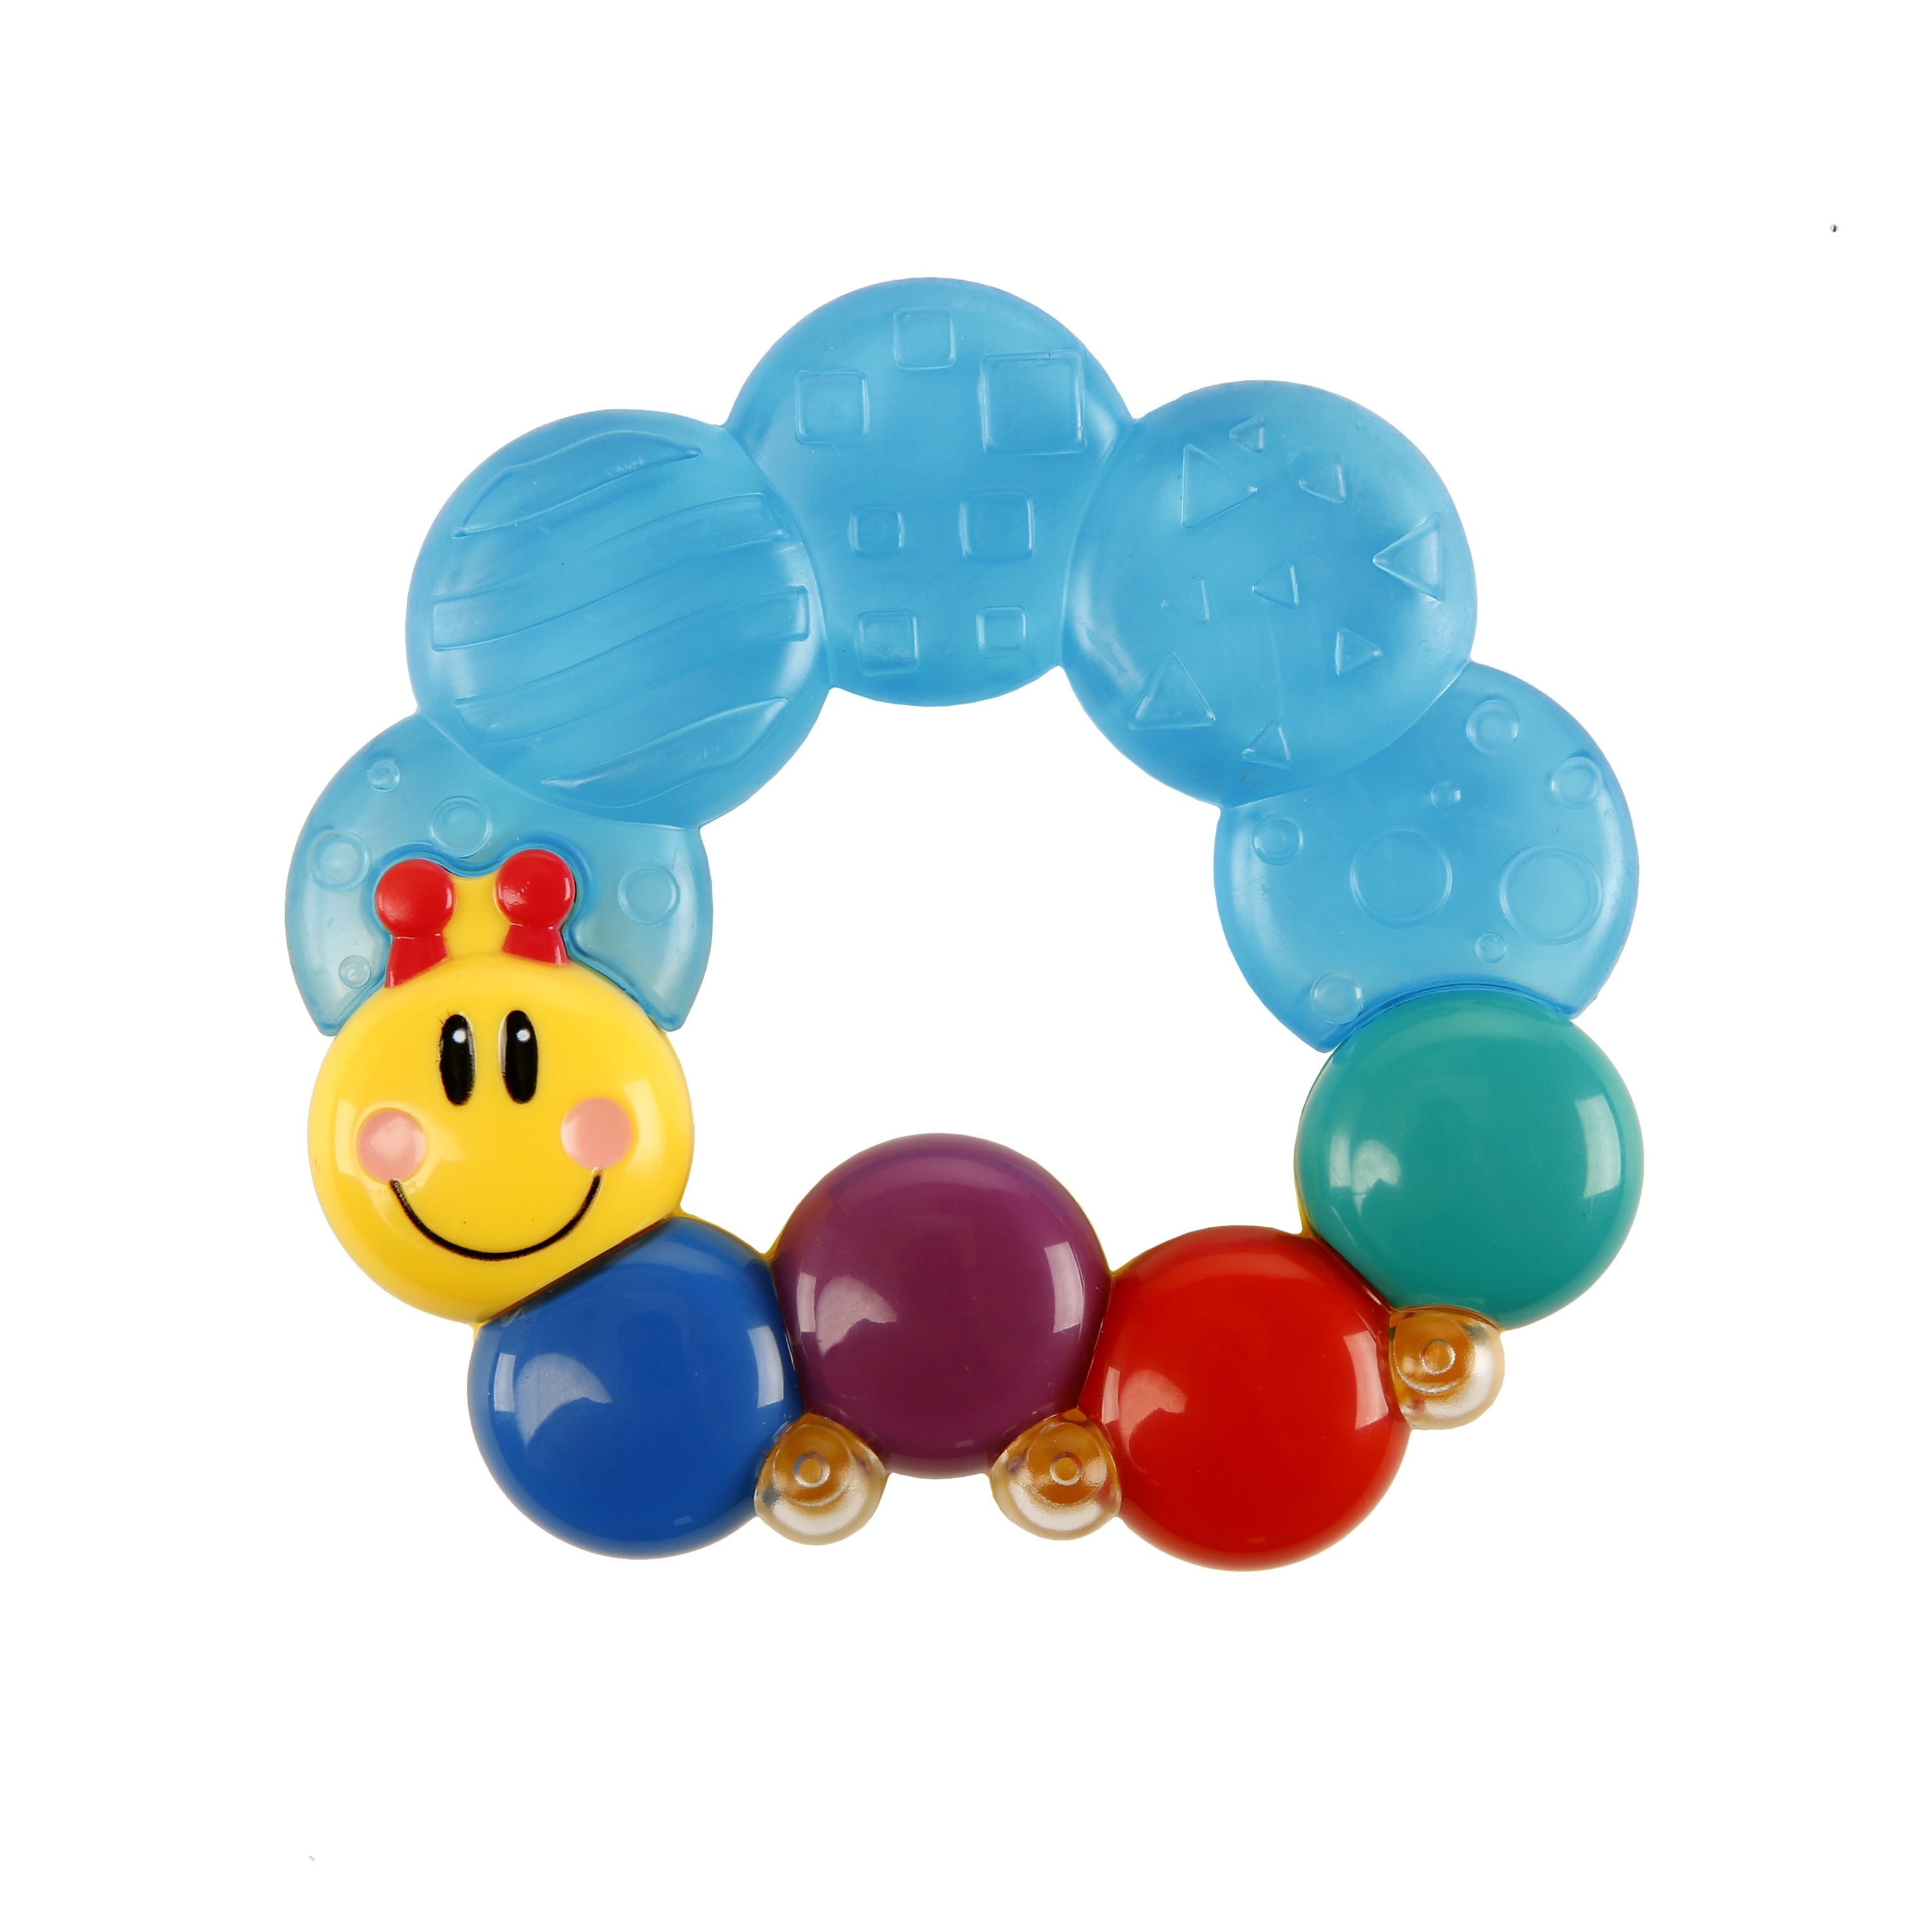 cold teething toys